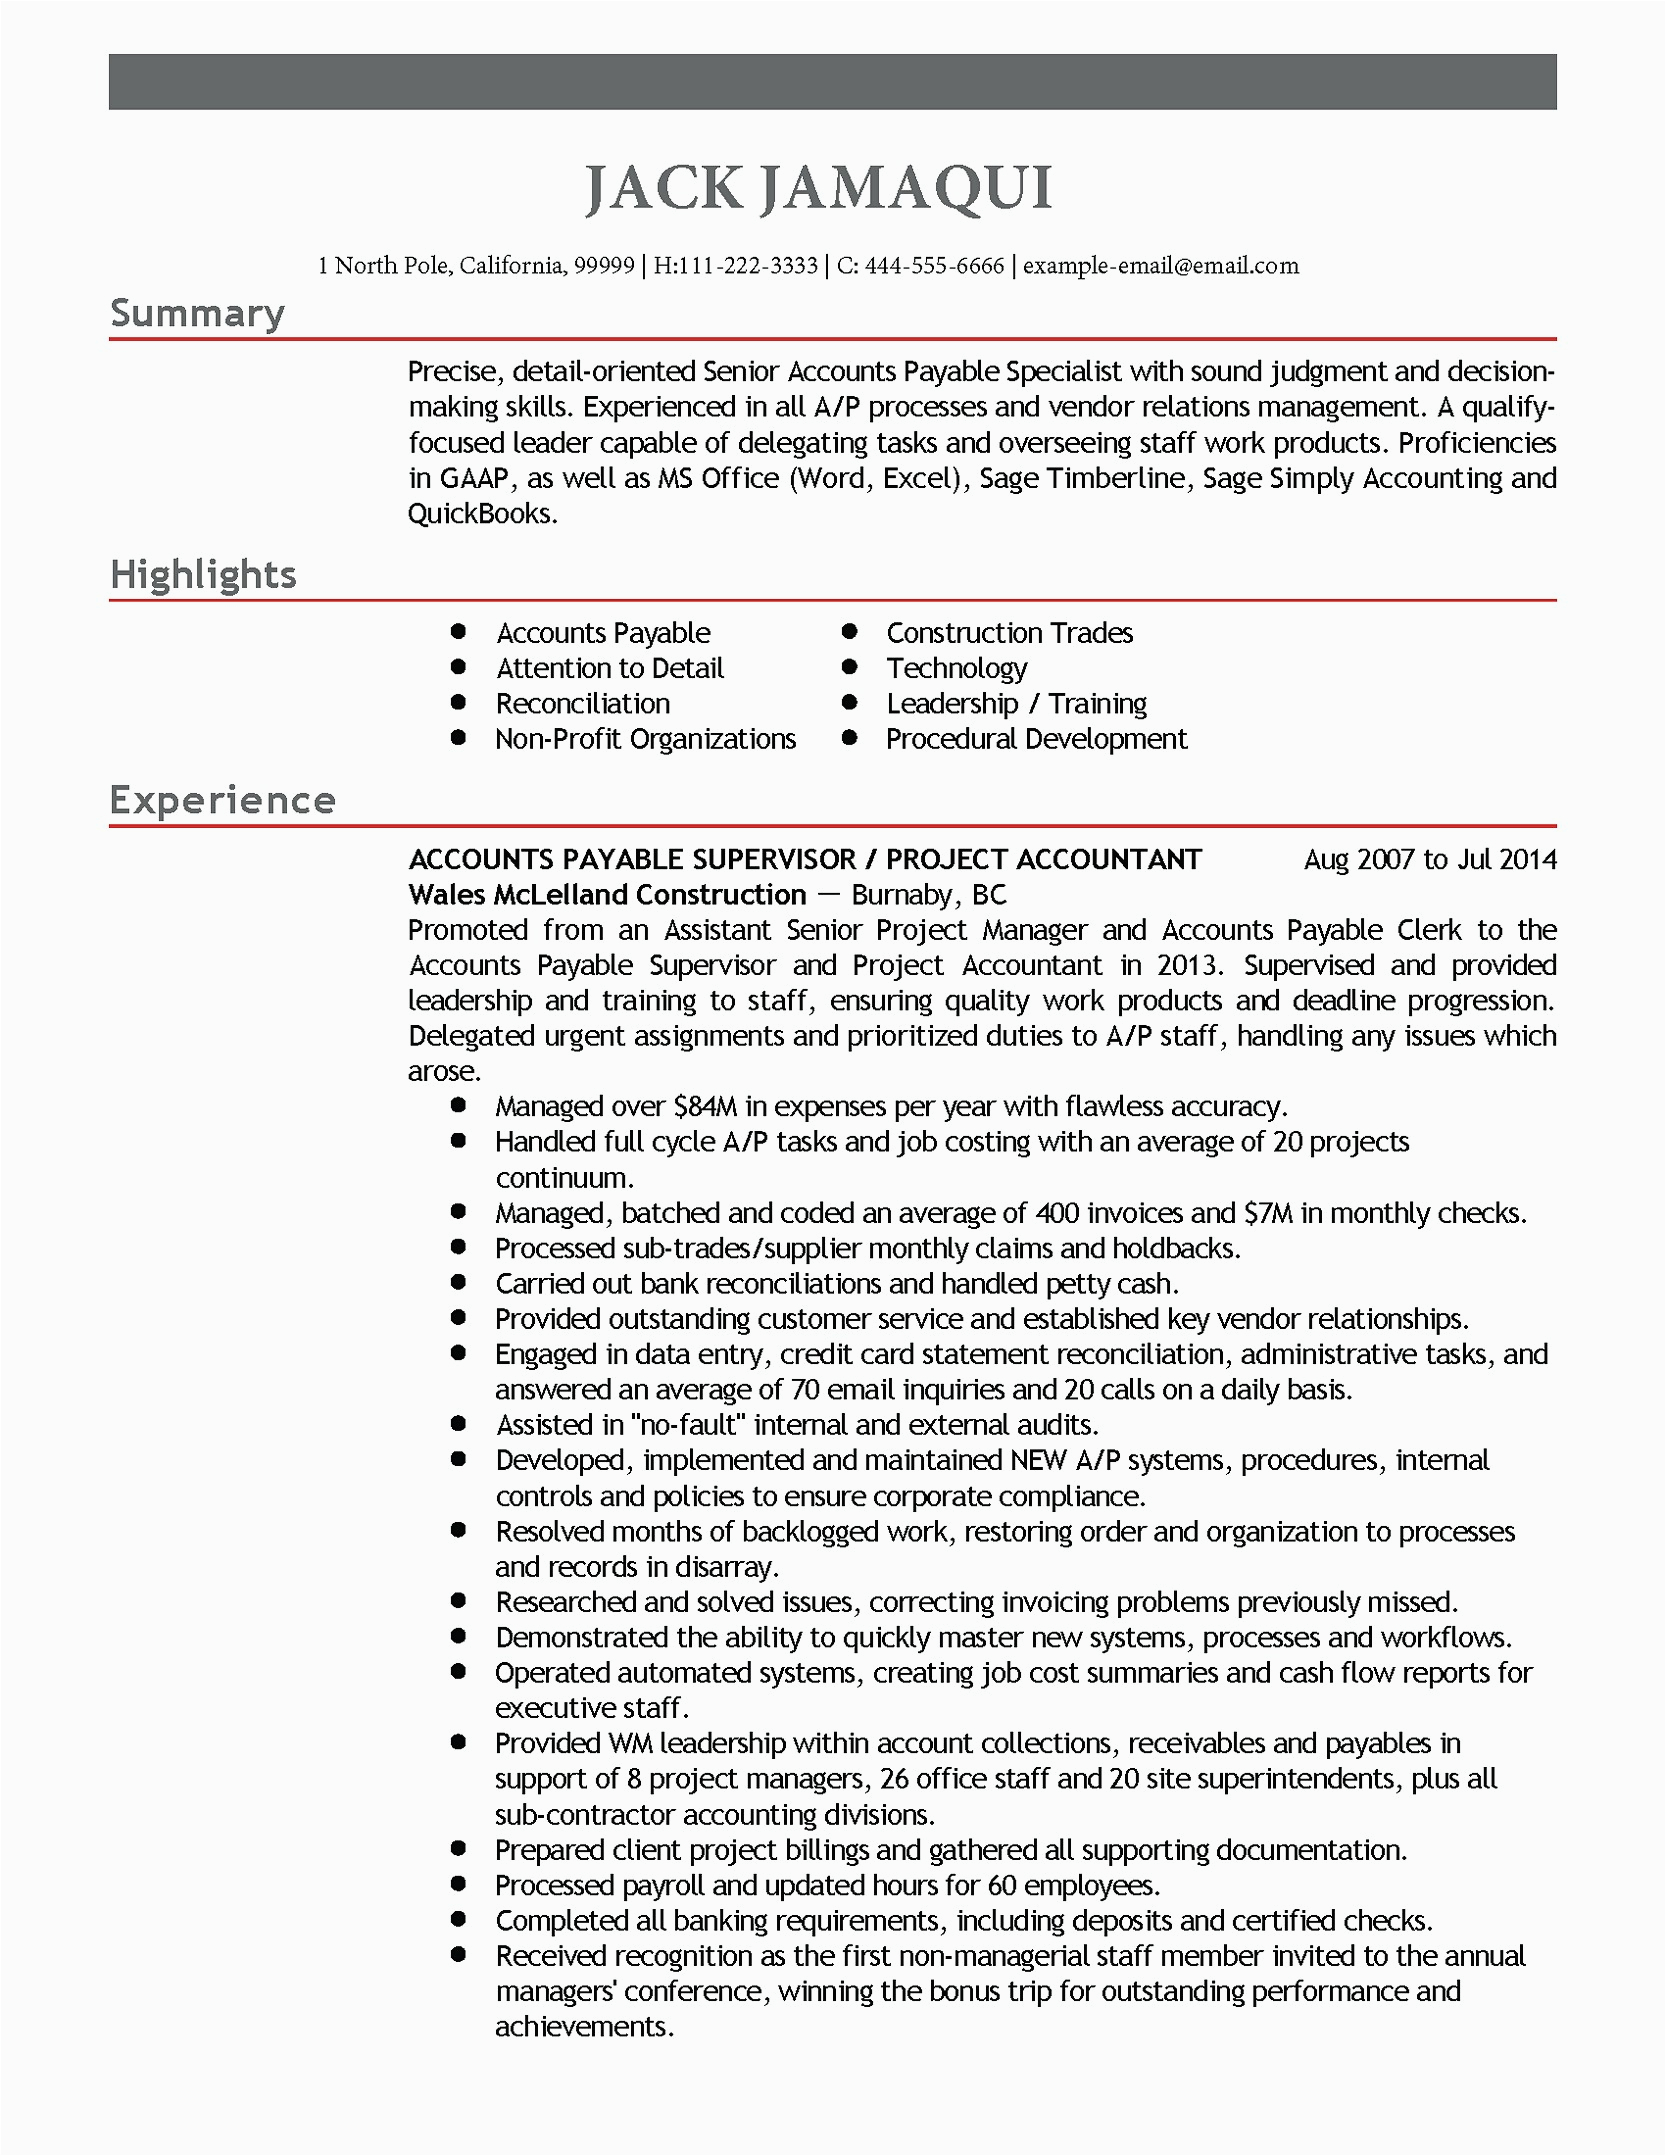 Sample Resume for Entry Level Accounts Payable Accounts Payable Manager Resume